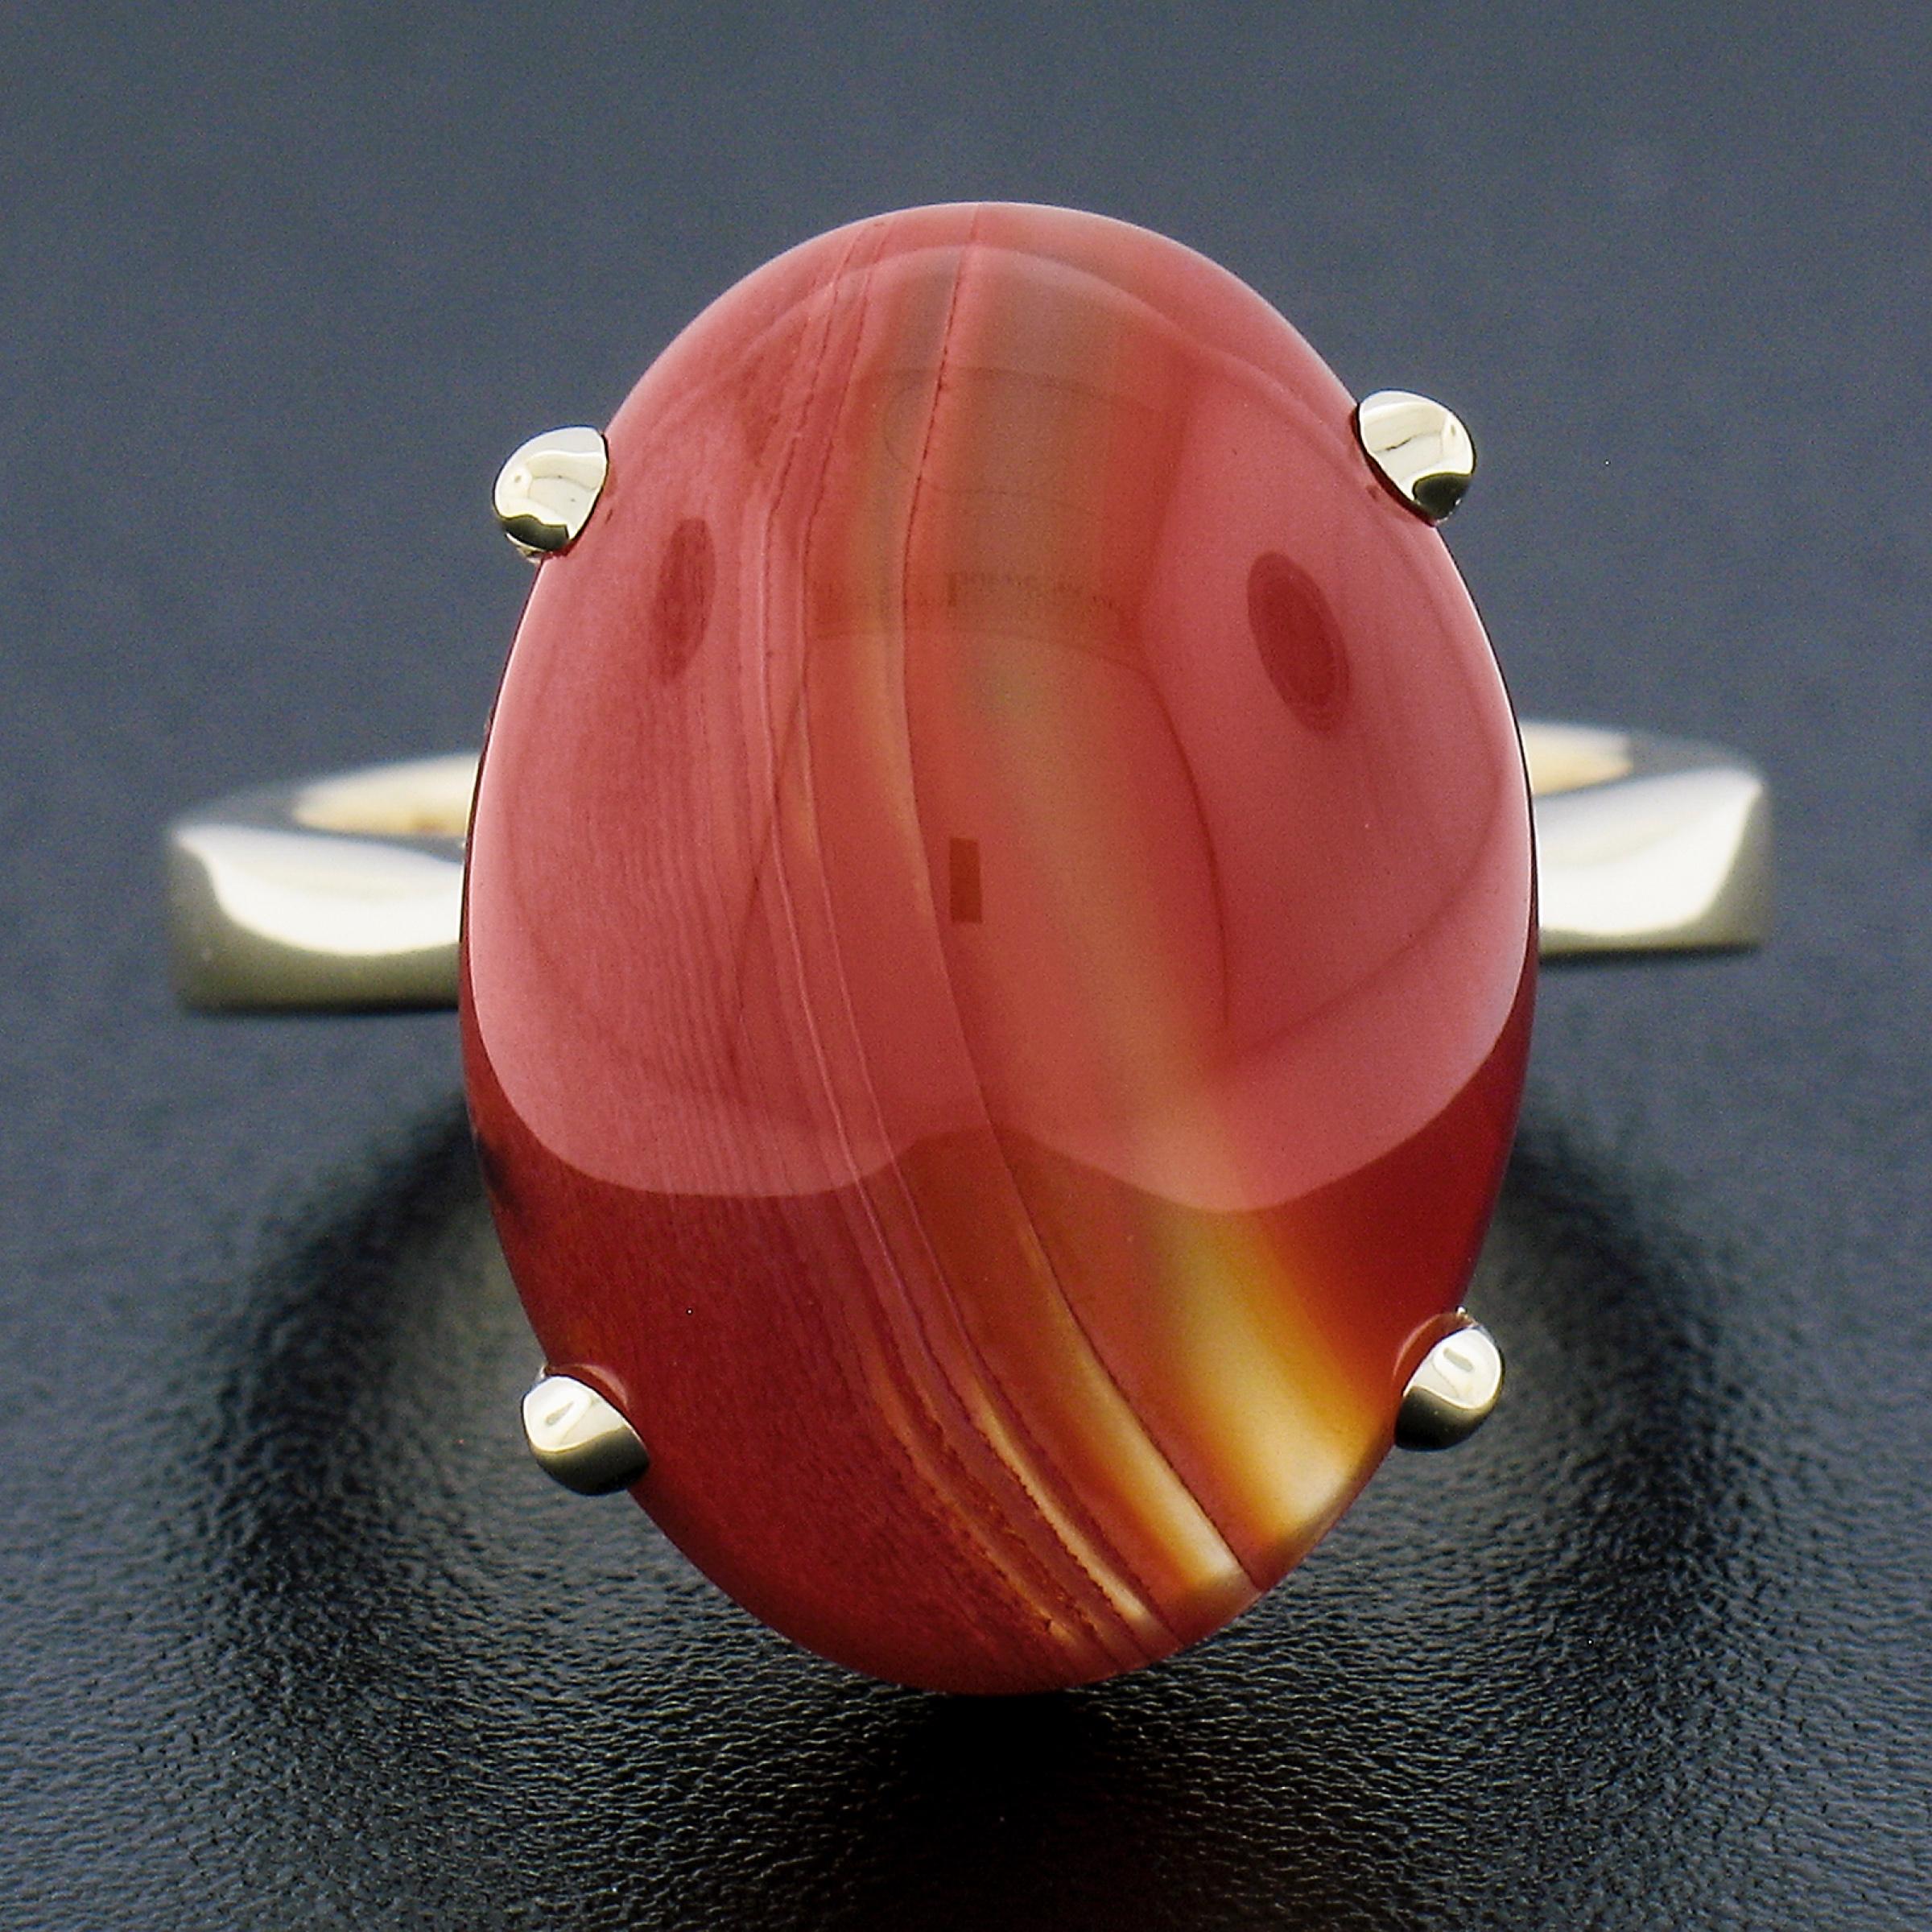 --Stone(s):--
(1) Natural Genuine Agate - Oval Cabochon Cut - Prong Set - Orange Color with Striations Lines - 18x13mm (approx.)

Material: Solid 14K Yellow Gold
Weight: 7.62 Grams
Ring Size: 6.5 (Fitted on a finger. We can custom size this ring -